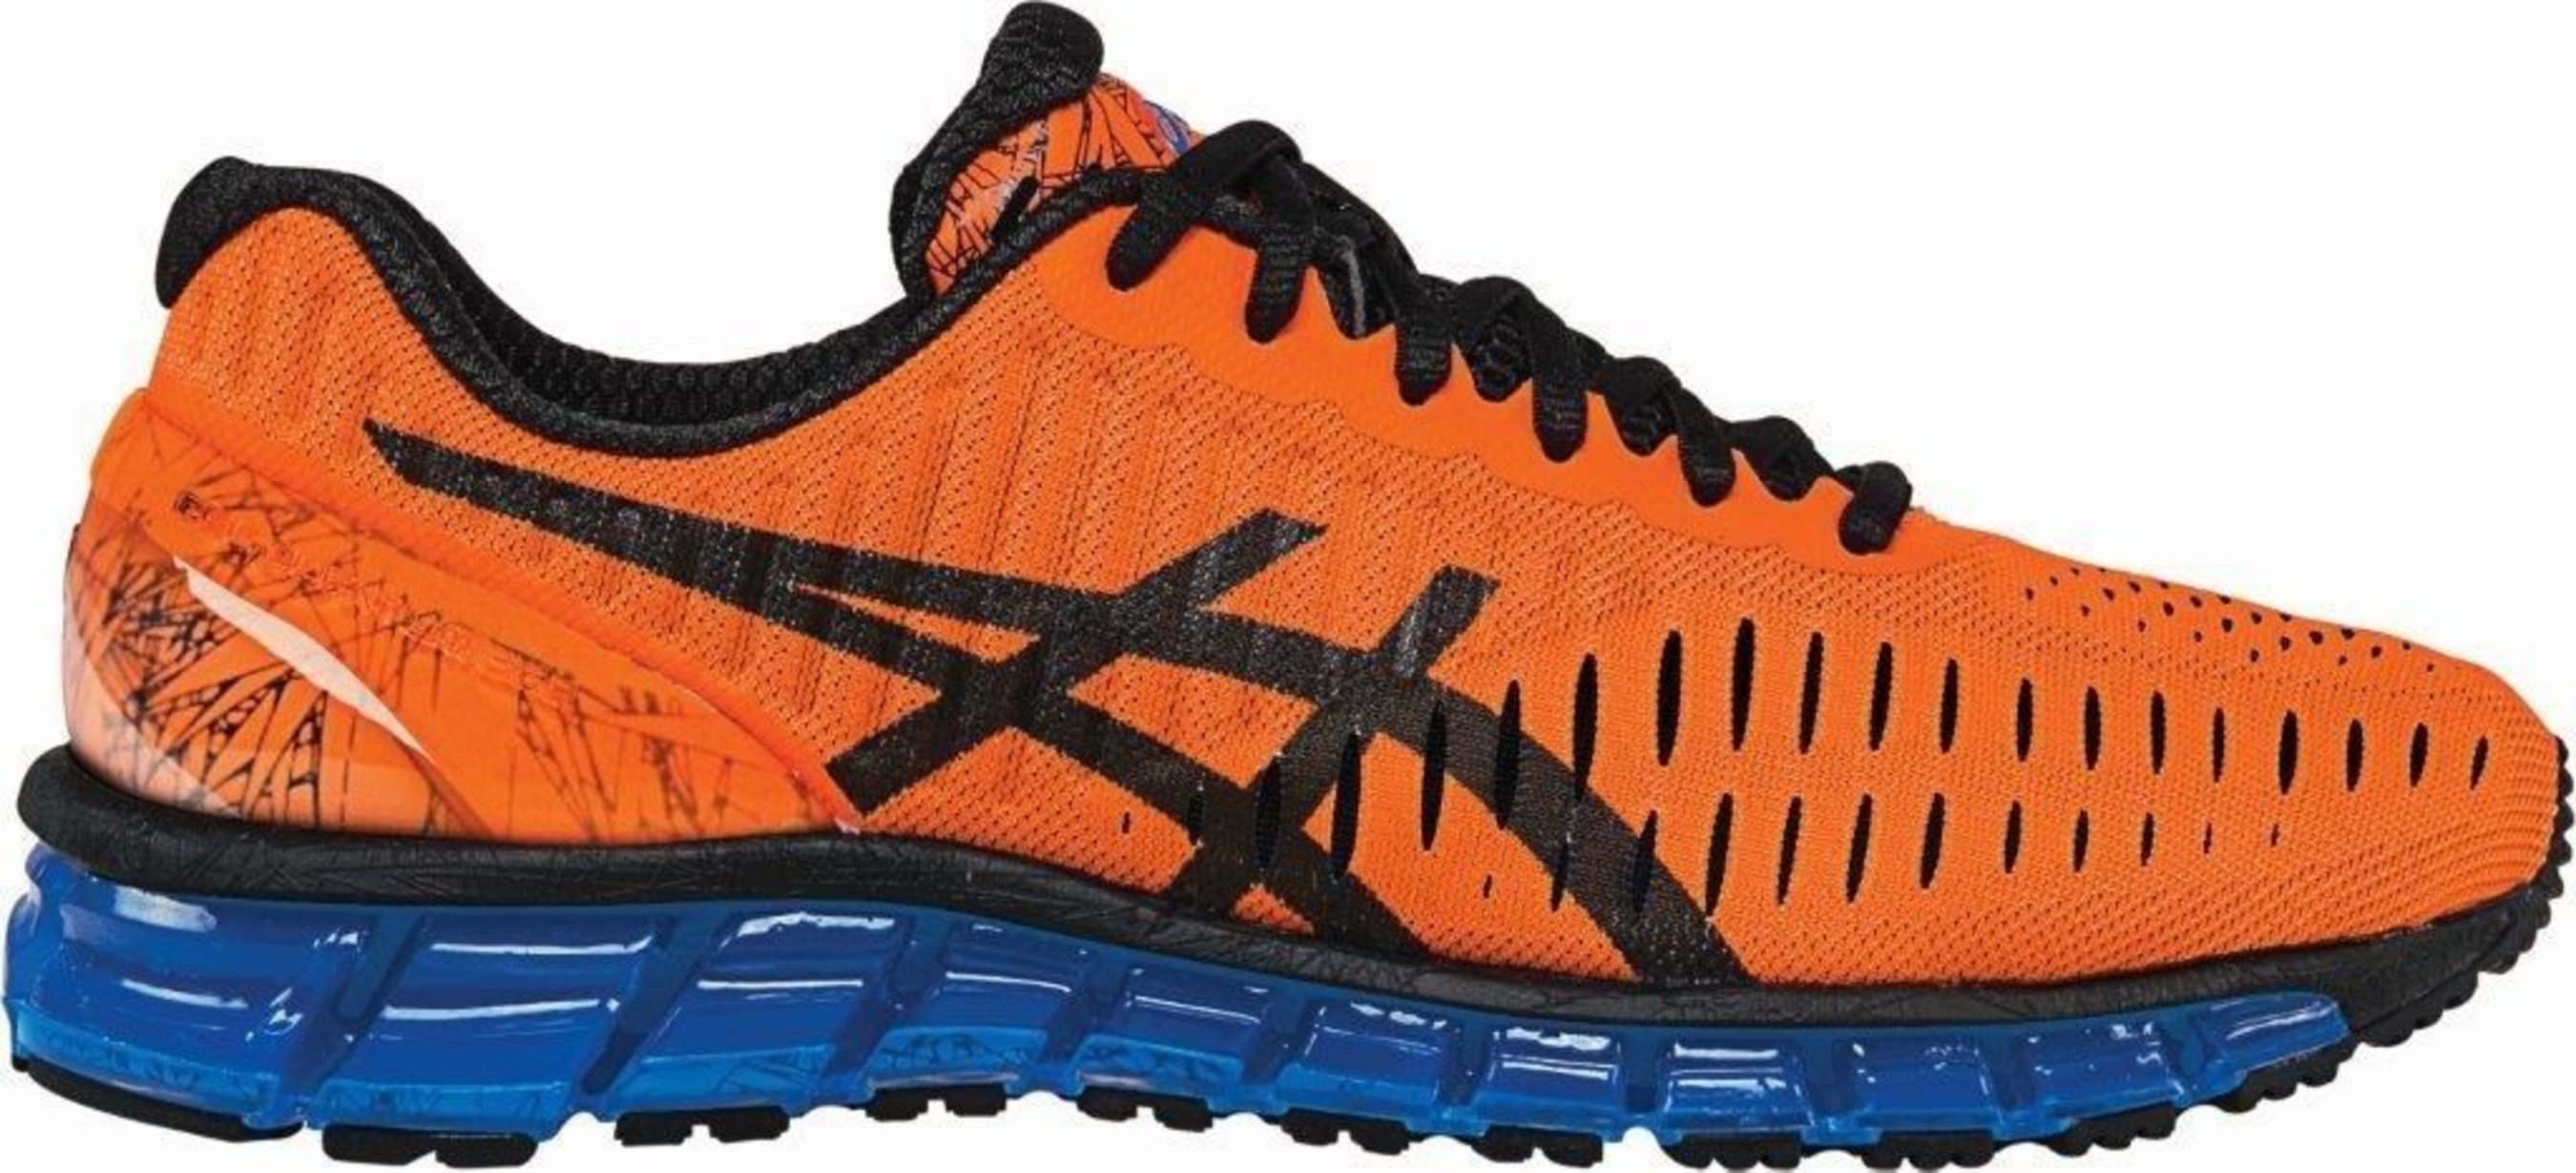 For The First Time ASICS Introduces 360 Degrees Of GEL® Cushioning  Technology With Launch Of GEL-Quantum 360™